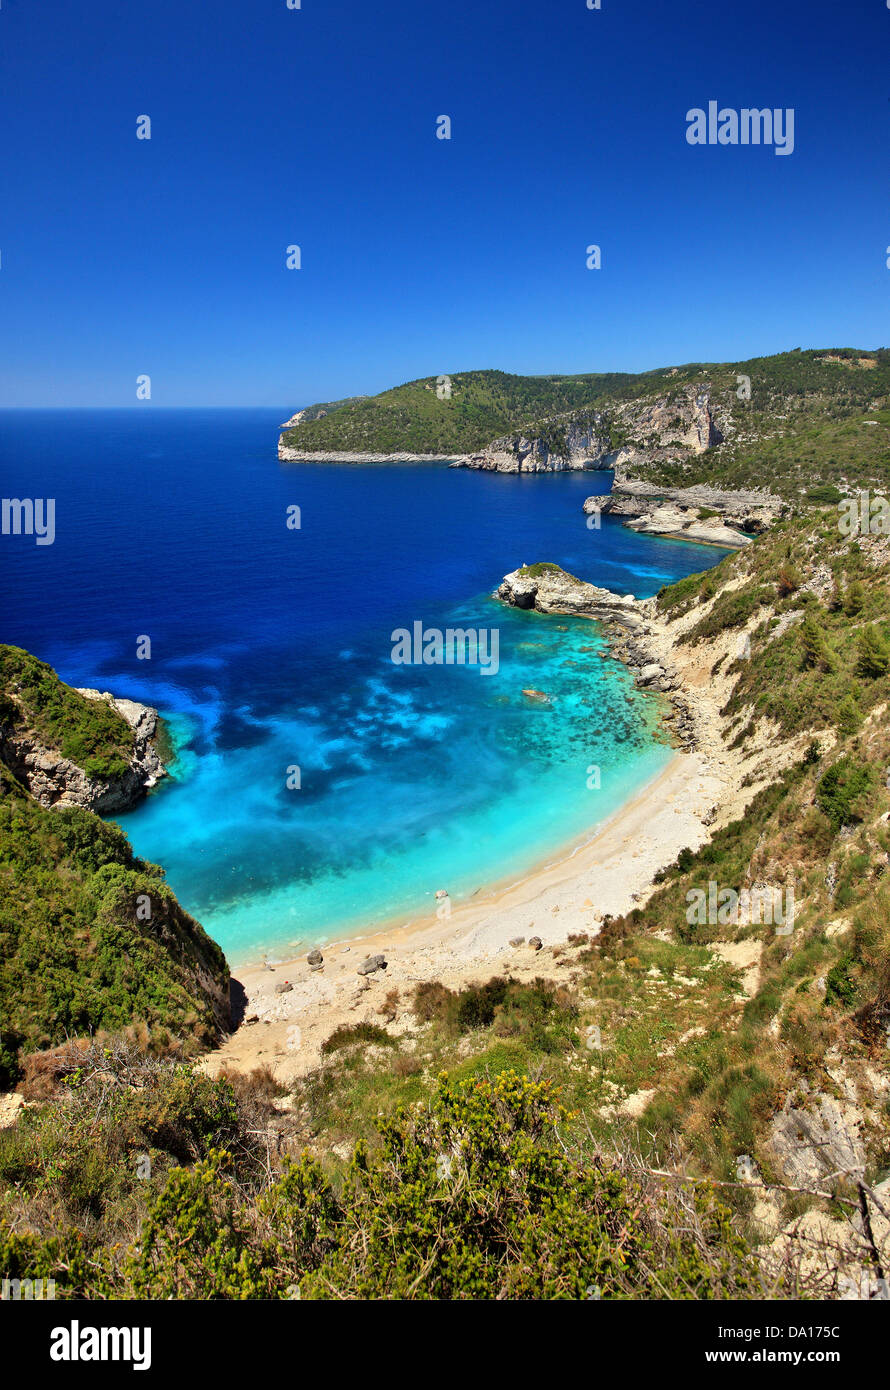 Galazio beach, (accessed only by boat), Paxos ("Paxi") island, Ionian Sea,  Eptanisa ("Seven Islands"), Greece Stock Photo - Alamy